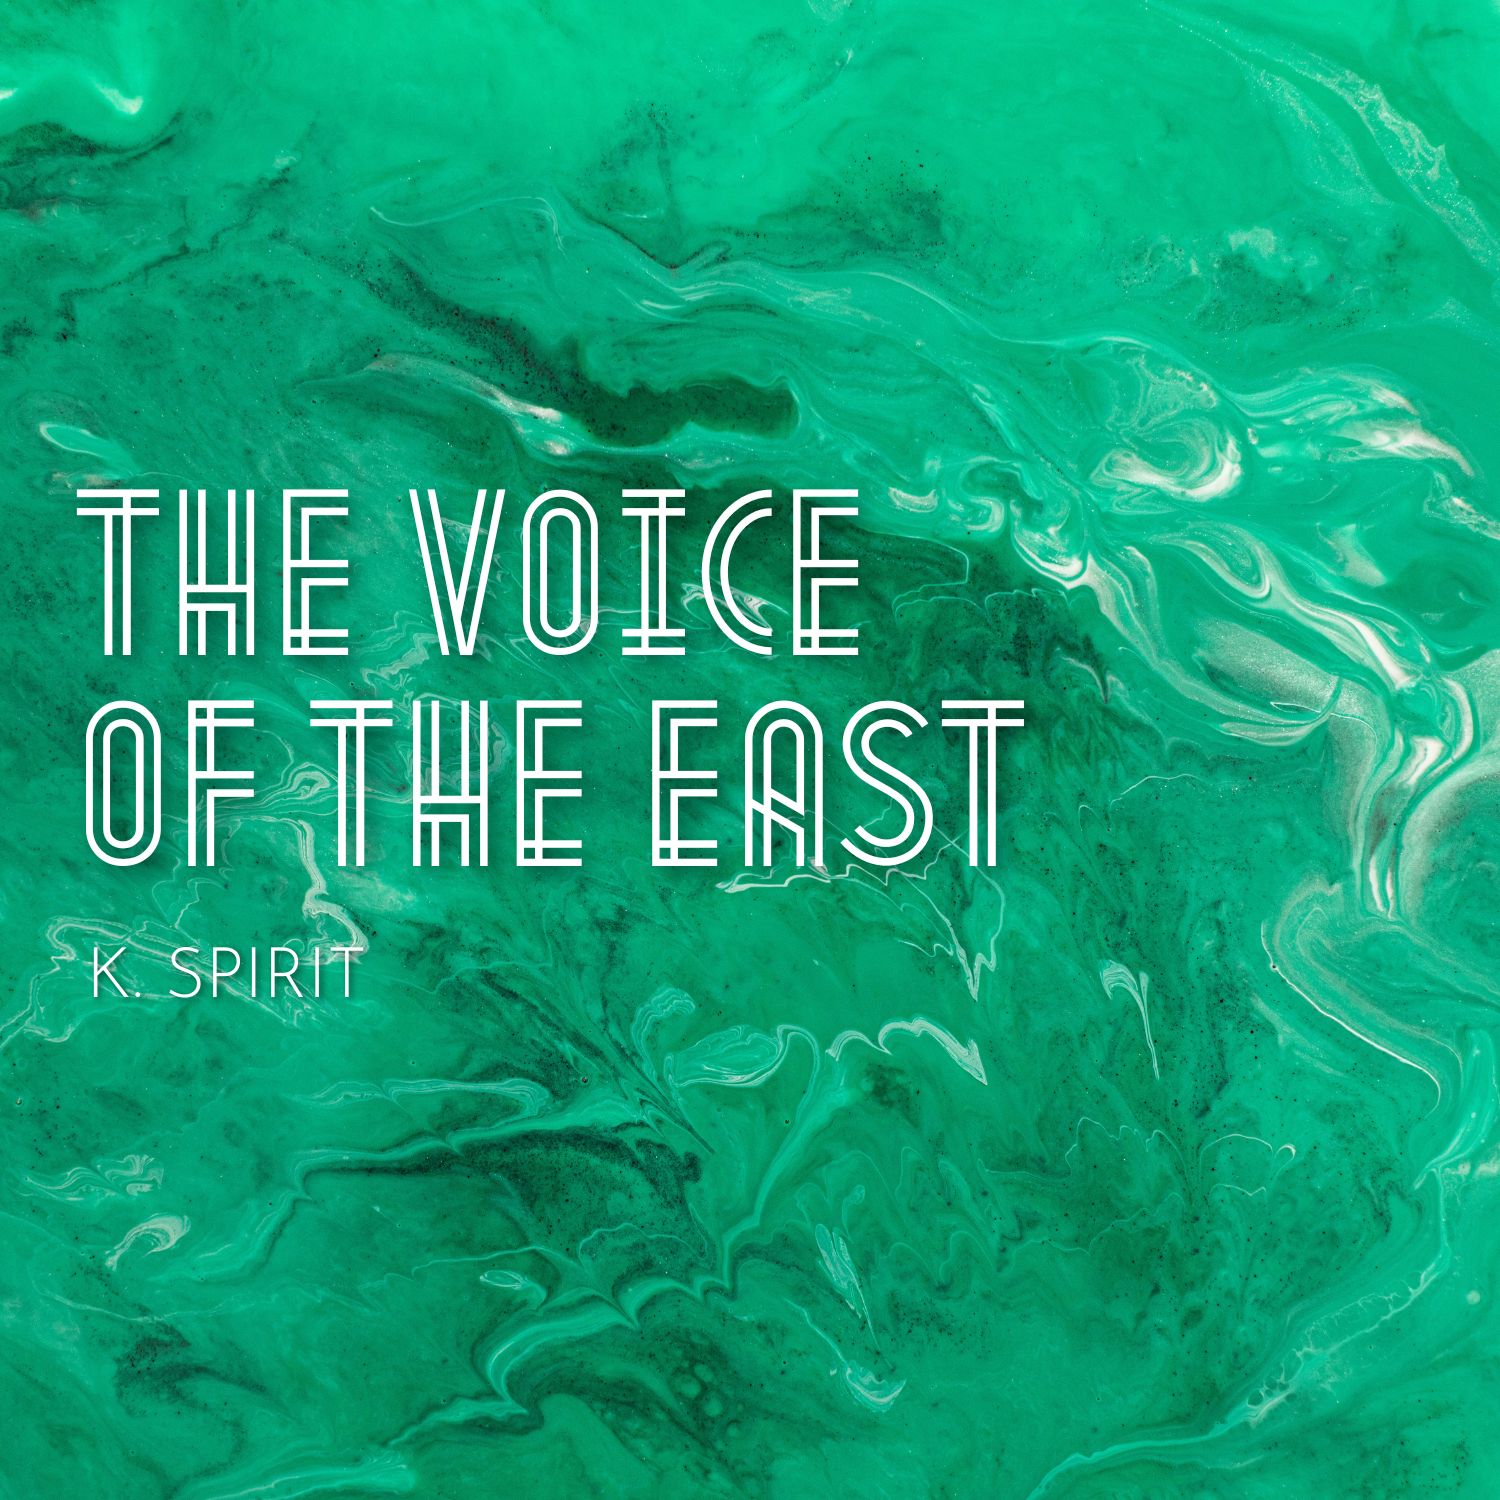 The Voice of the East